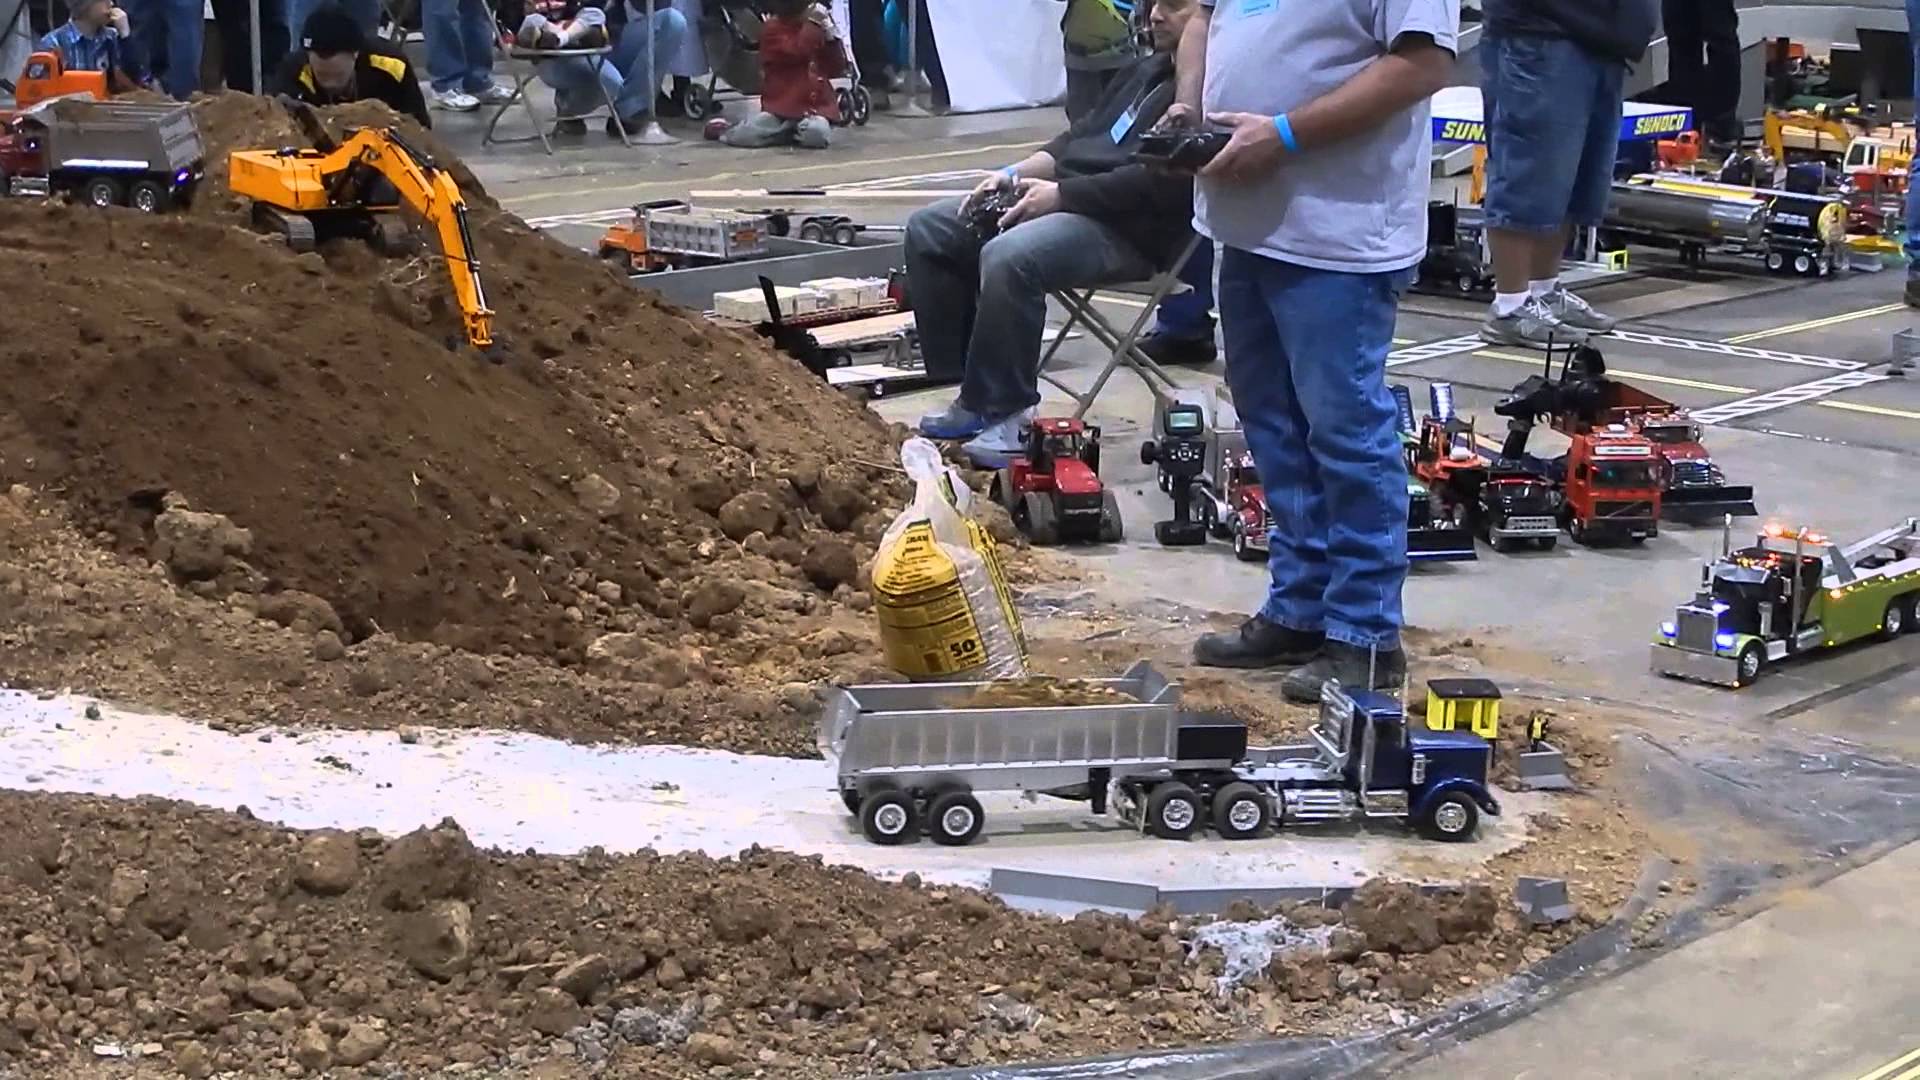 Cabin Fever - Mini Construction Equipment in the Dirt Pit - YouTube